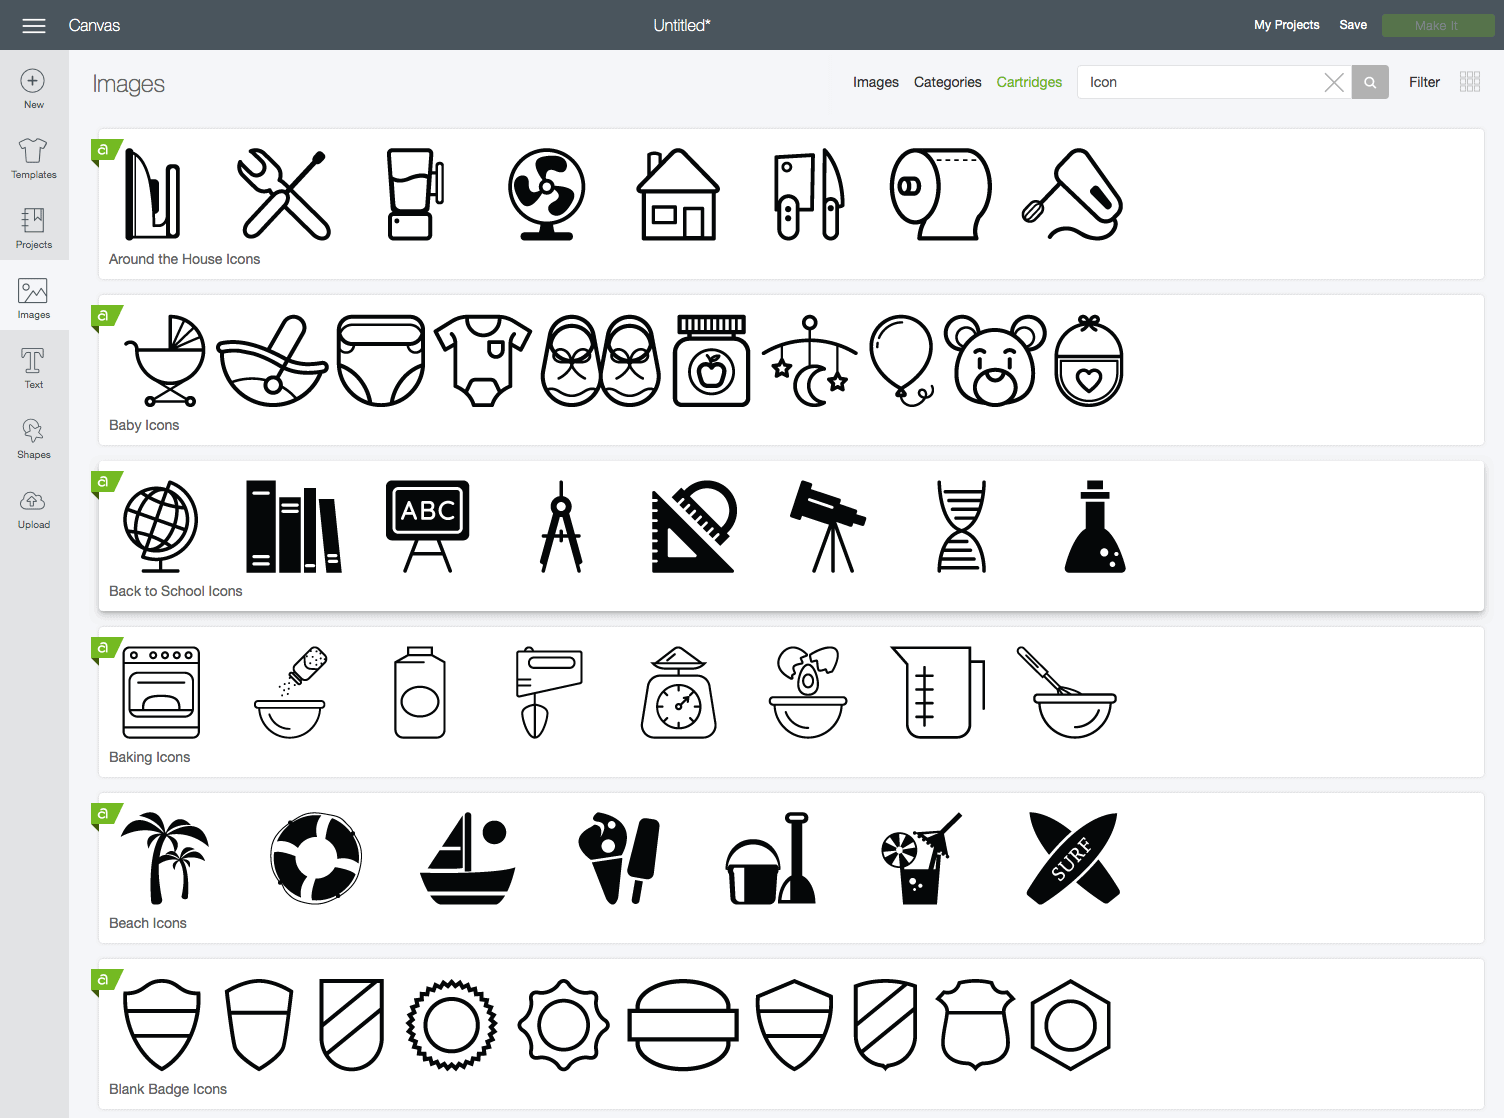 screenshot of the cricut design studio interface with examples of different icon designs.